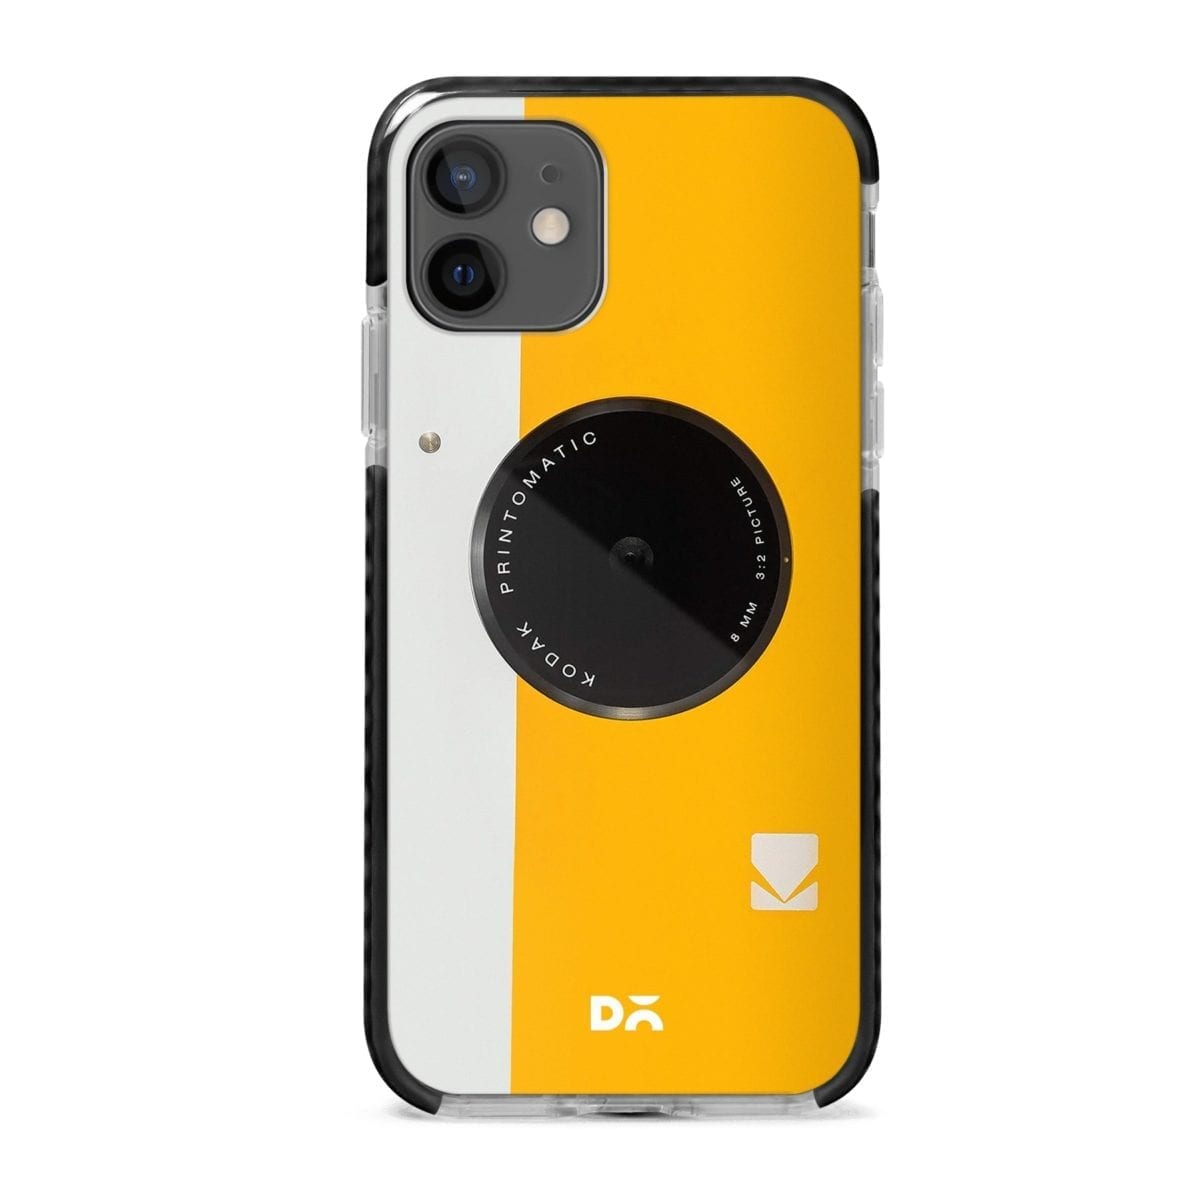 Kodak Yellow Stride Case Cover for Apple iPhone 12 Mini and Apple iPhone 12 with great design and shock proof | Klippik | Online Shopping | Kuwait UAE Saudi